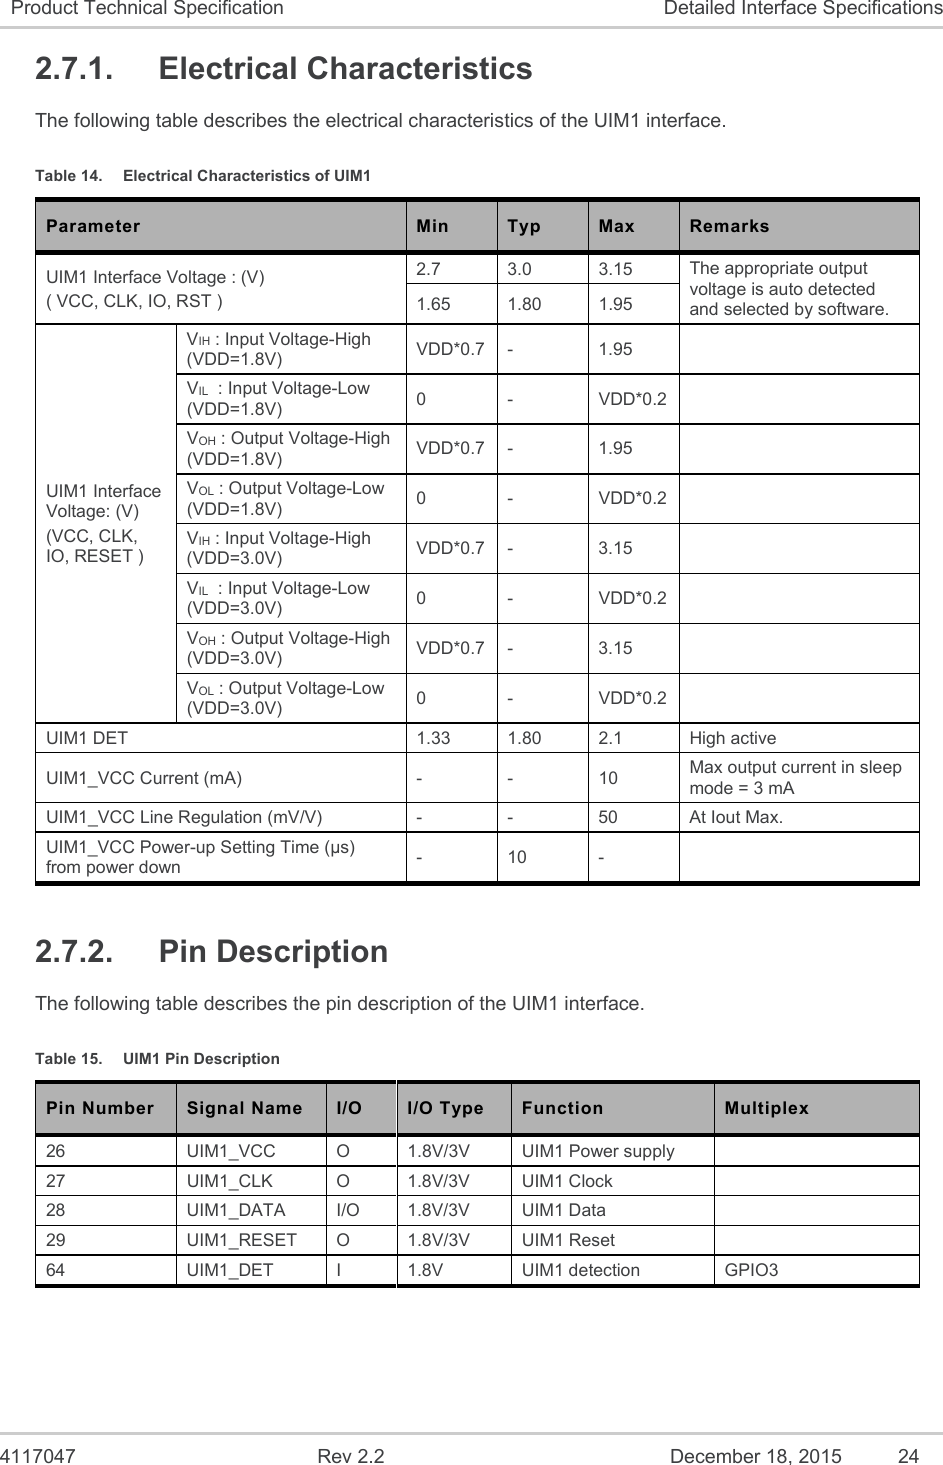  4117047  Rev 2.2  December 18, 2015  24 Product Technical Specification  Detailed Interface Specifications 2.7.1.  Electrical Characteristics The following table describes the electrical characteristics of the UIM1 interface. Table 14.  Electrical Characteristics of UIM1 Parameter  Min  Typ  Max  Remarks UIM1 Interface Voltage : (V) ( VCC, CLK, IO, RST ) 2.7  3.0  3.15  The appropriate output voltage is auto detected and selected by software. 1.65  1.80  1.95 UIM1 Interface Voltage: (V) (VCC, CLK, IO, RESET ) VIH : Input Voltage-High       (VDD=1.8V)  VDD*0.7  -  1.95   VIL  : Input Voltage-Low       (VDD=1.8V)  0  -  VDD*0.2   VOH : Output Voltage-High   (VDD=1.8V)  VDD*0.7  -  1.95   VOL : Output Voltage-Low    (VDD=1.8V)  0  -  VDD*0.2   VIH : Input Voltage-High       (VDD=3.0V)  VDD*0.7  -  3.15   VIL  : Input Voltage-Low       (VDD=3.0V)  0  -  VDD*0.2   VOH : Output Voltage-High   (VDD=3.0V)  VDD*0.7  -  3.15   VOL : Output Voltage-Low    (VDD=3.0V)  0  -  VDD*0.2   UIM1 DET  1.33  1.80  2.1  High active UIM1_VCC Current (mA)  -  -  10  Max output current in sleep mode = 3 mA UIM1_VCC Line Regulation (mV/V)  -  -  50  At Iout Max. UIM1_VCC Power-up Setting Time (µs) from power down  -  10  -   2.7.2.  Pin Description The following table describes the pin description of the UIM1 interface. Table 15.  UIM1 Pin Description Pin Number  Signal Name  I/O  I/O Type  Function  Multiplex 26  UIM1_VCC  O  1.8V/3V   UIM1 Power supply   27  UIM1_CLK  O  1.8V/3V   UIM1 Clock   28  UIM1_DATA  I/O  1.8V/3V   UIM1 Data   29  UIM1_RESET  O  1.8V/3V   UIM1 Reset   64  UIM1_DET  I  1.8V  UIM1 detection  GPIO3 